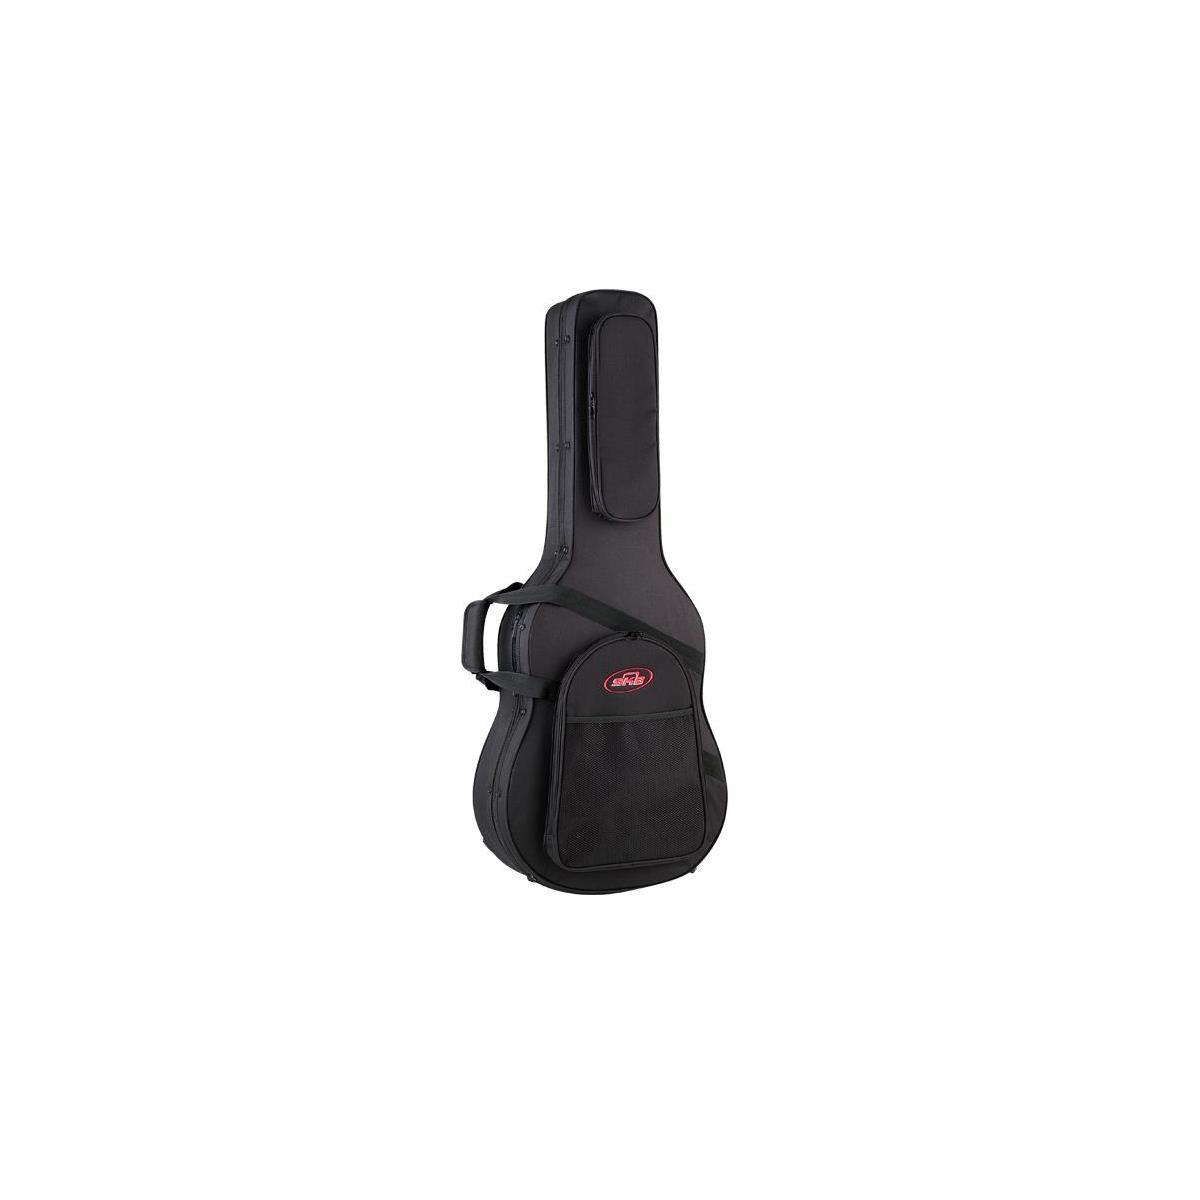 Image of SKB Soft Case with EPS Foam Interior for Dreadnought Acoustic Guitar